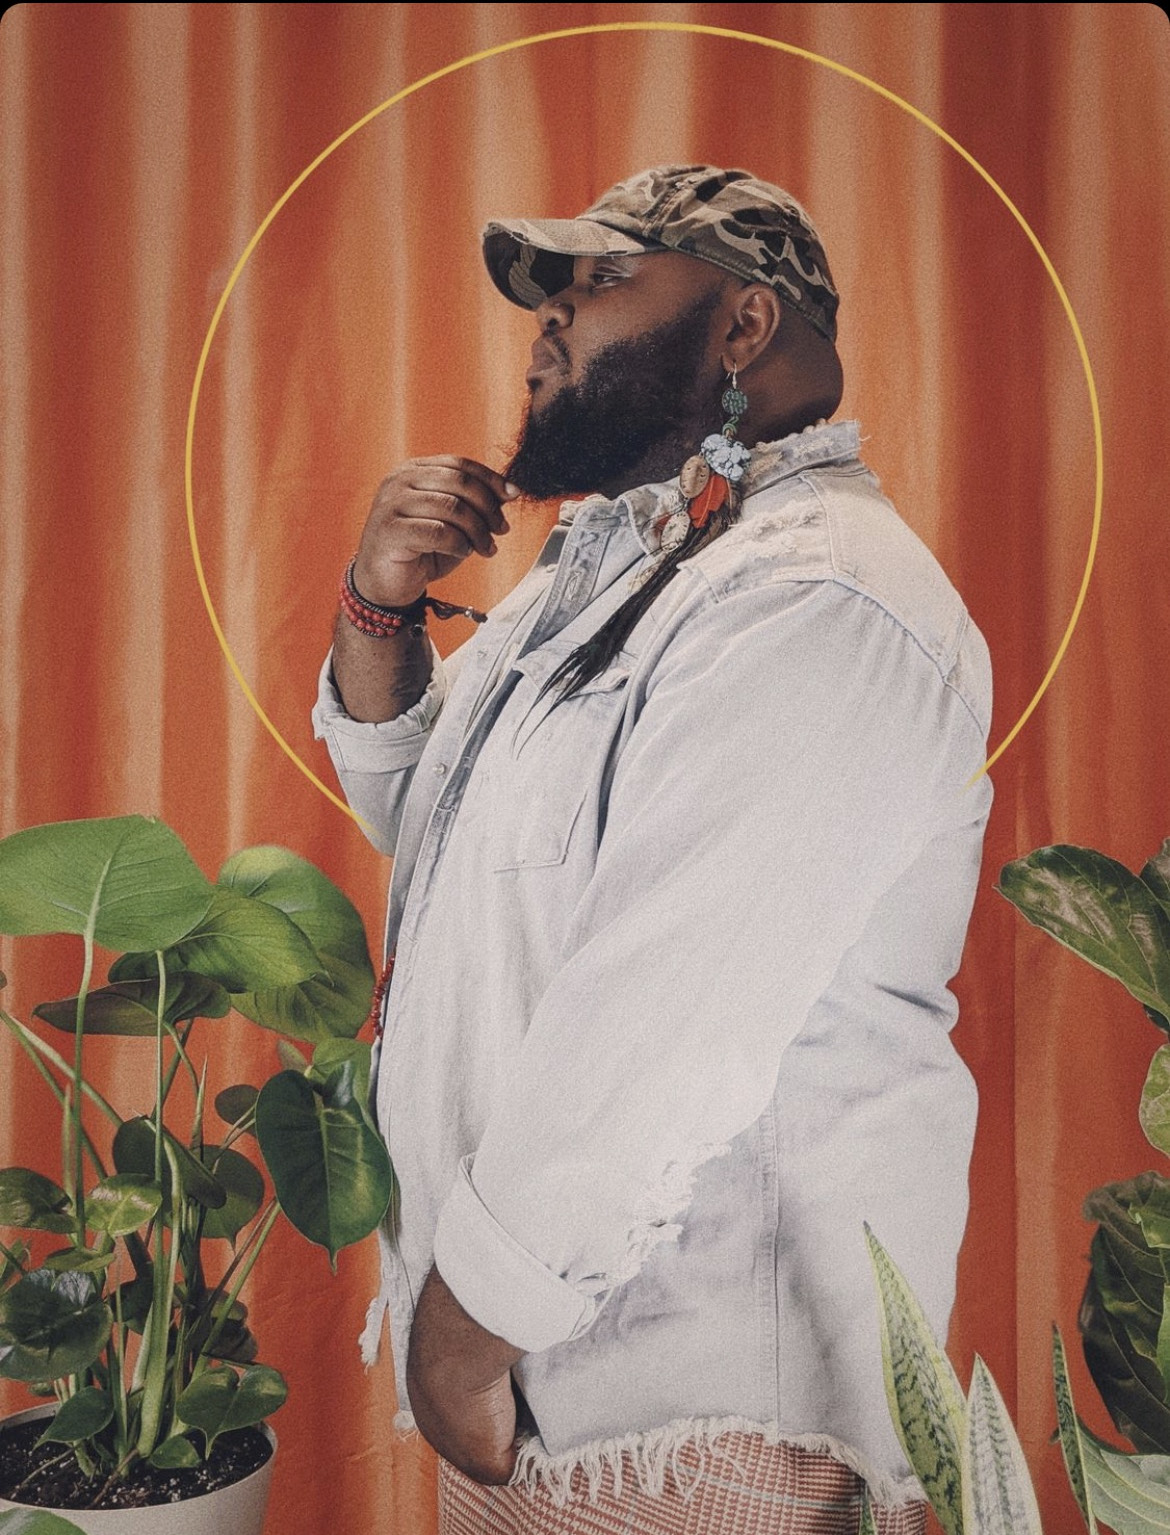 A profile portrait of a dark skinned person lightly holding the tip of their beard wearing a grey jean button down, long dangly earring and army print baseball cap. They are surrounded by house plants and a rich orange curtain hangs behind them